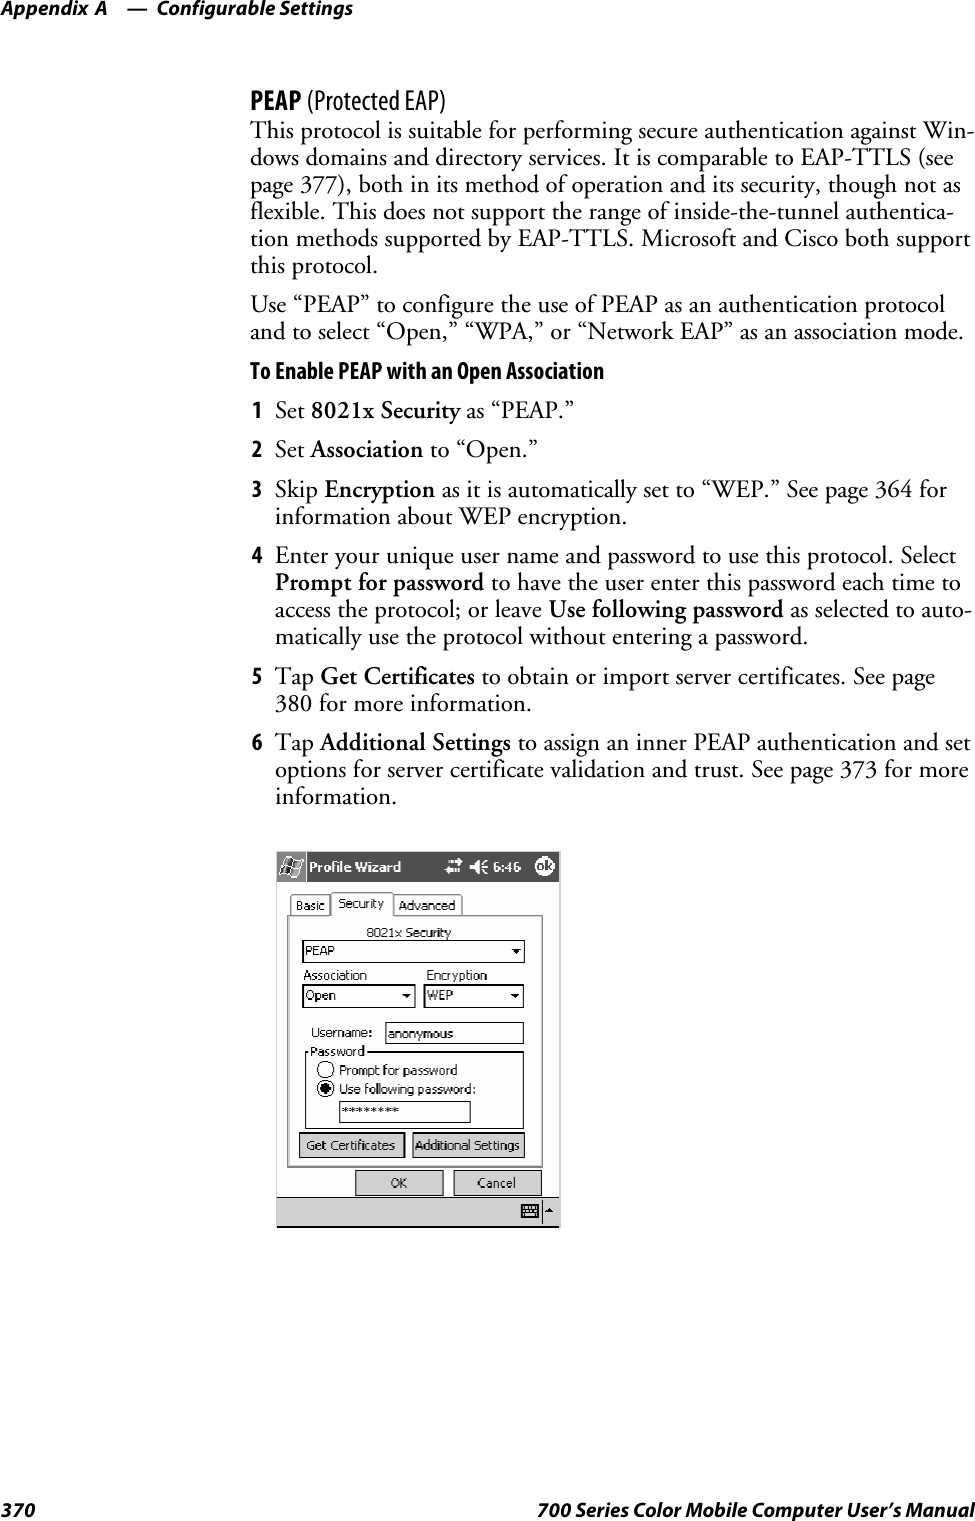 Configurable SettingsAppendix —A370 700 Series Color Mobile Computer User’s ManualPEAP (Protected EAP)This protocol is suitable for performing secure authentication against Win-dows domains and directory services. It is comparable to EAP-TTLS (seepage 377), both in its method of operation and its security, though not asflexible. This does not support the range of inside-the-tunnel authentica-tion methods supported by EAP-TTLS. Microsoft and Cisco both supportthis protocol.Use “PEAP” to configure the use of PEAP as an authentication protocoland to select “Open,” “WPA,” or “Network EAP” as an association mode.To Enable PEAP with an Open Association1Set 8021x Security as “PEAP.”2Set Association to “Open.”3Skip Encryption as it is automatically set to “WEP.” See page 364 forinformation about WEP encryption.4Enter your unique user name and password to use this protocol. SelectPrompt for password to have the user enter this password each time toaccess the protocol; or leave Use following password as selected to auto-matically use the protocol without entering a password.5Tap Get Certificates to obtain or import server certificates. See page380 for more information.6Tap Additional Settings to assign an inner PEAP authentication and setoptions for server certificate validation and trust. See page 373 for moreinformation.